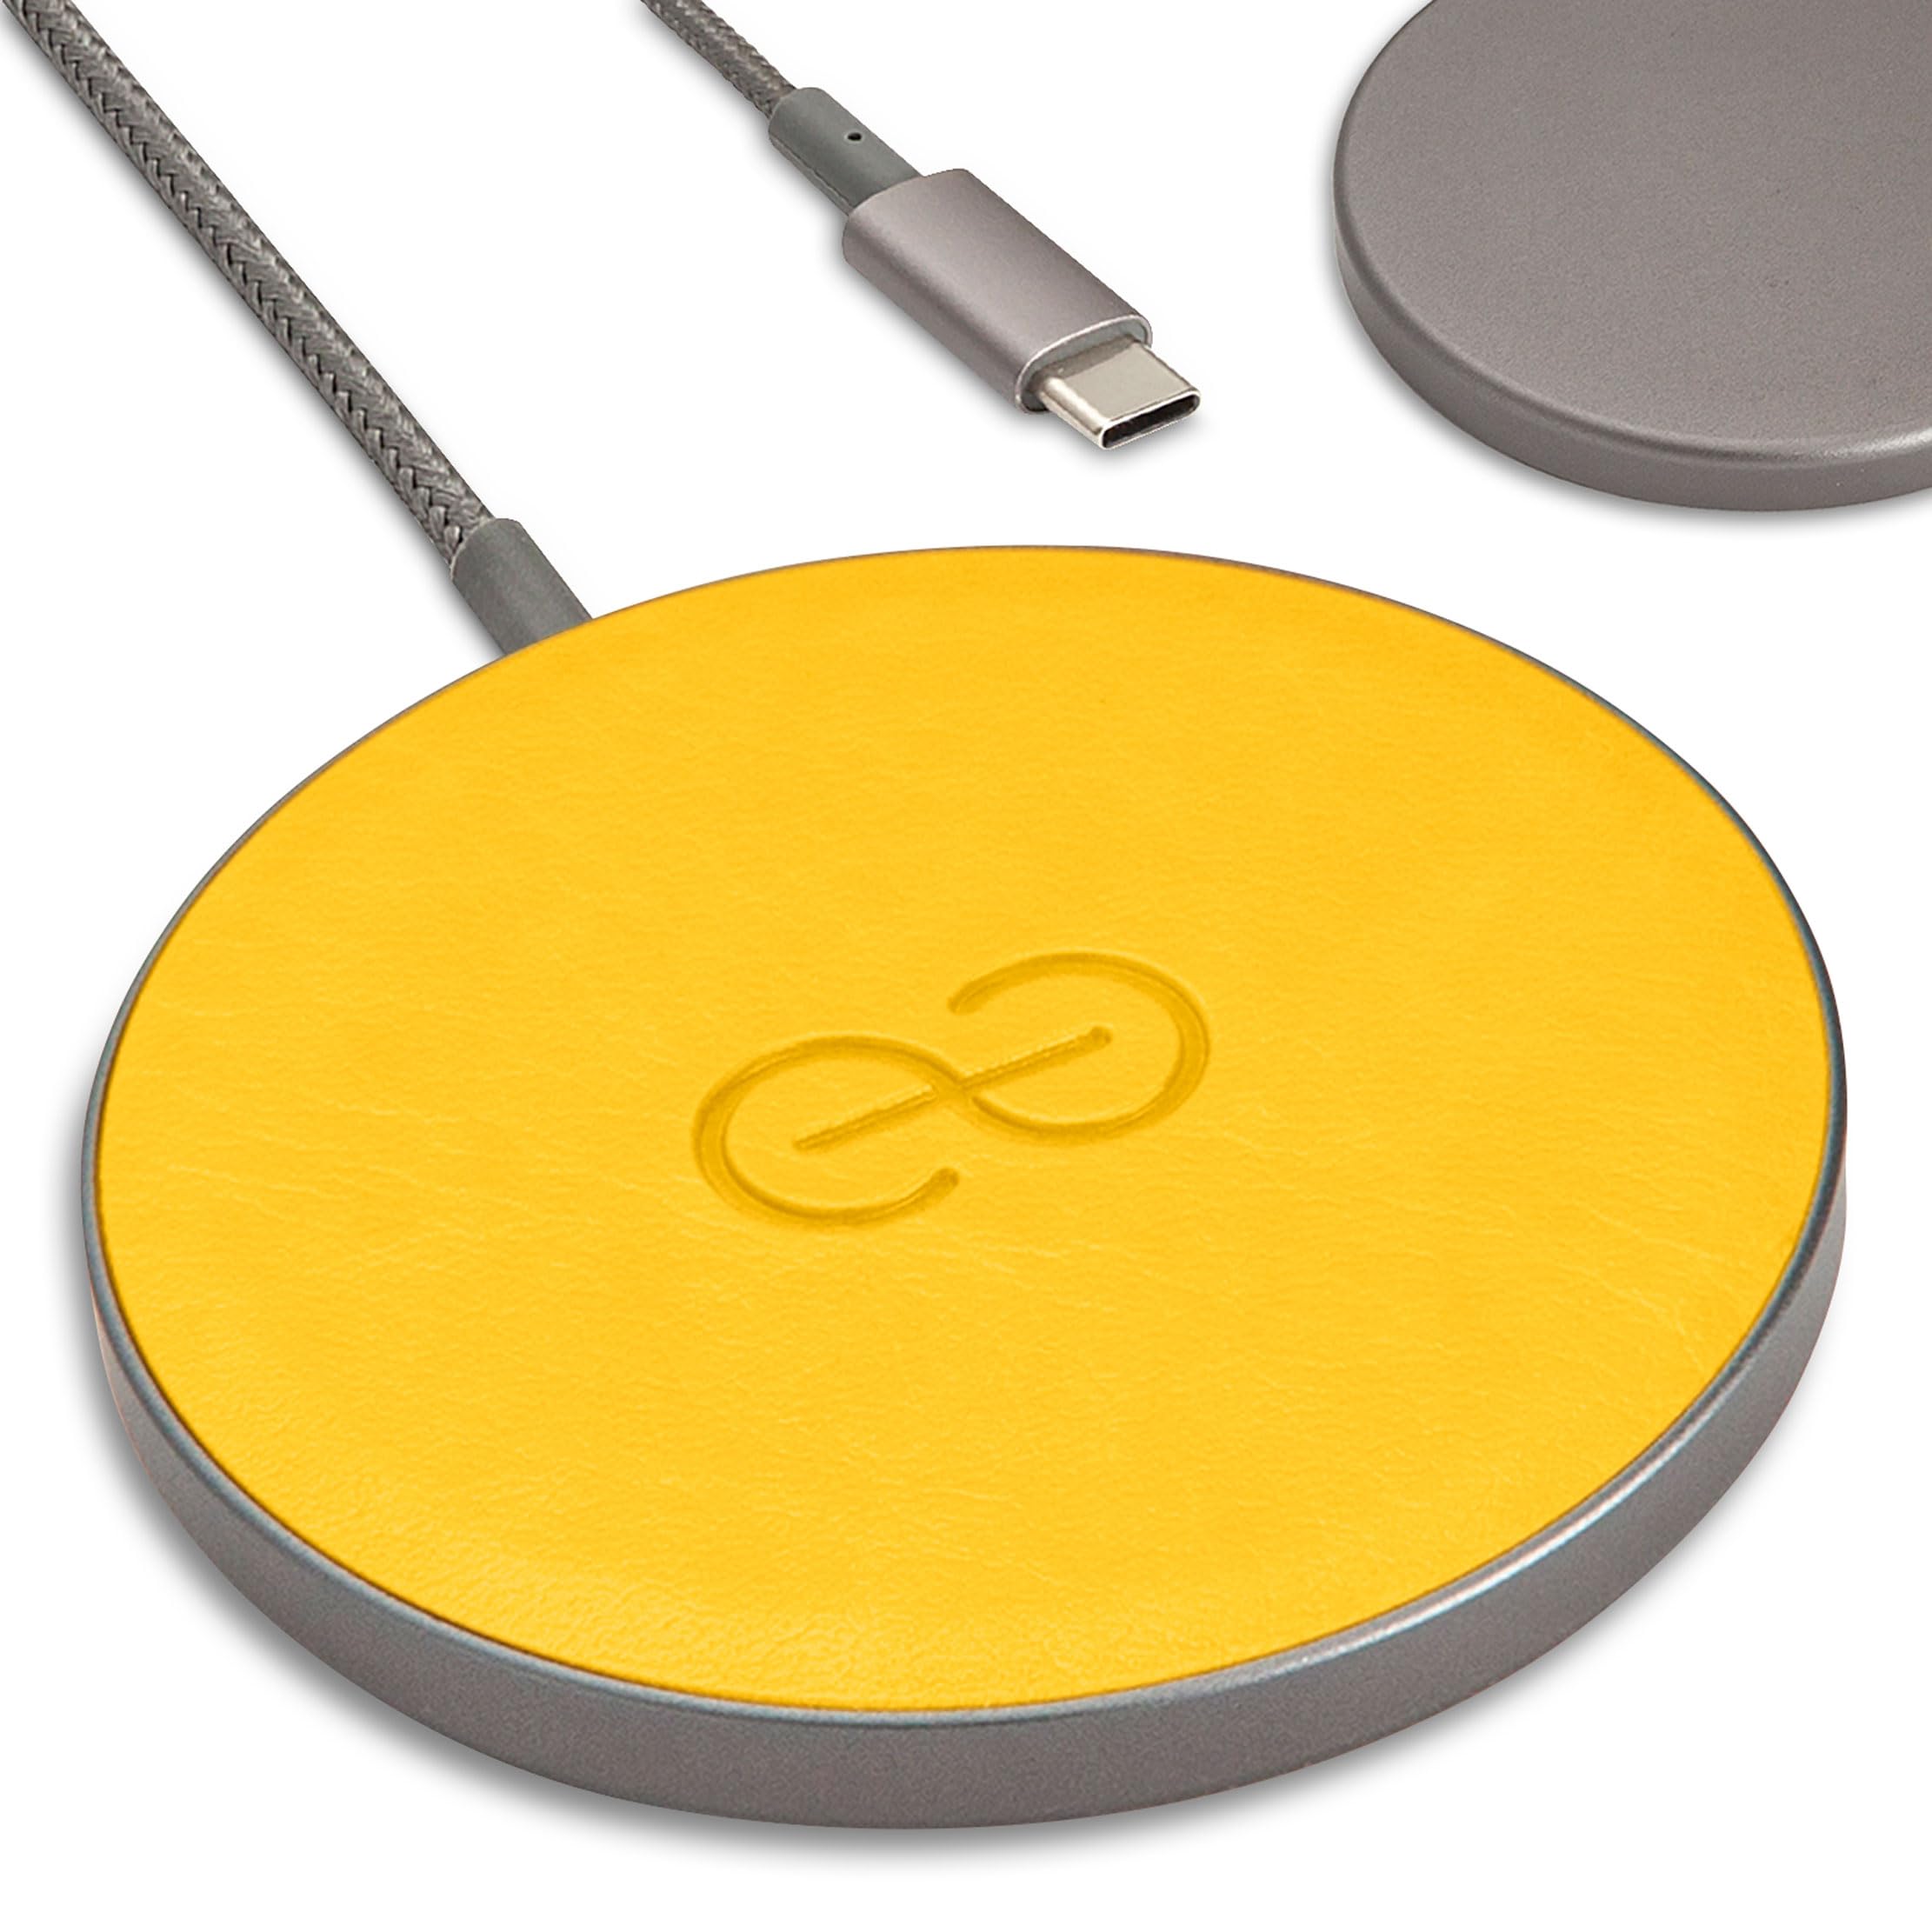  Dreem Empower Magnetic Wireless Charger Pad